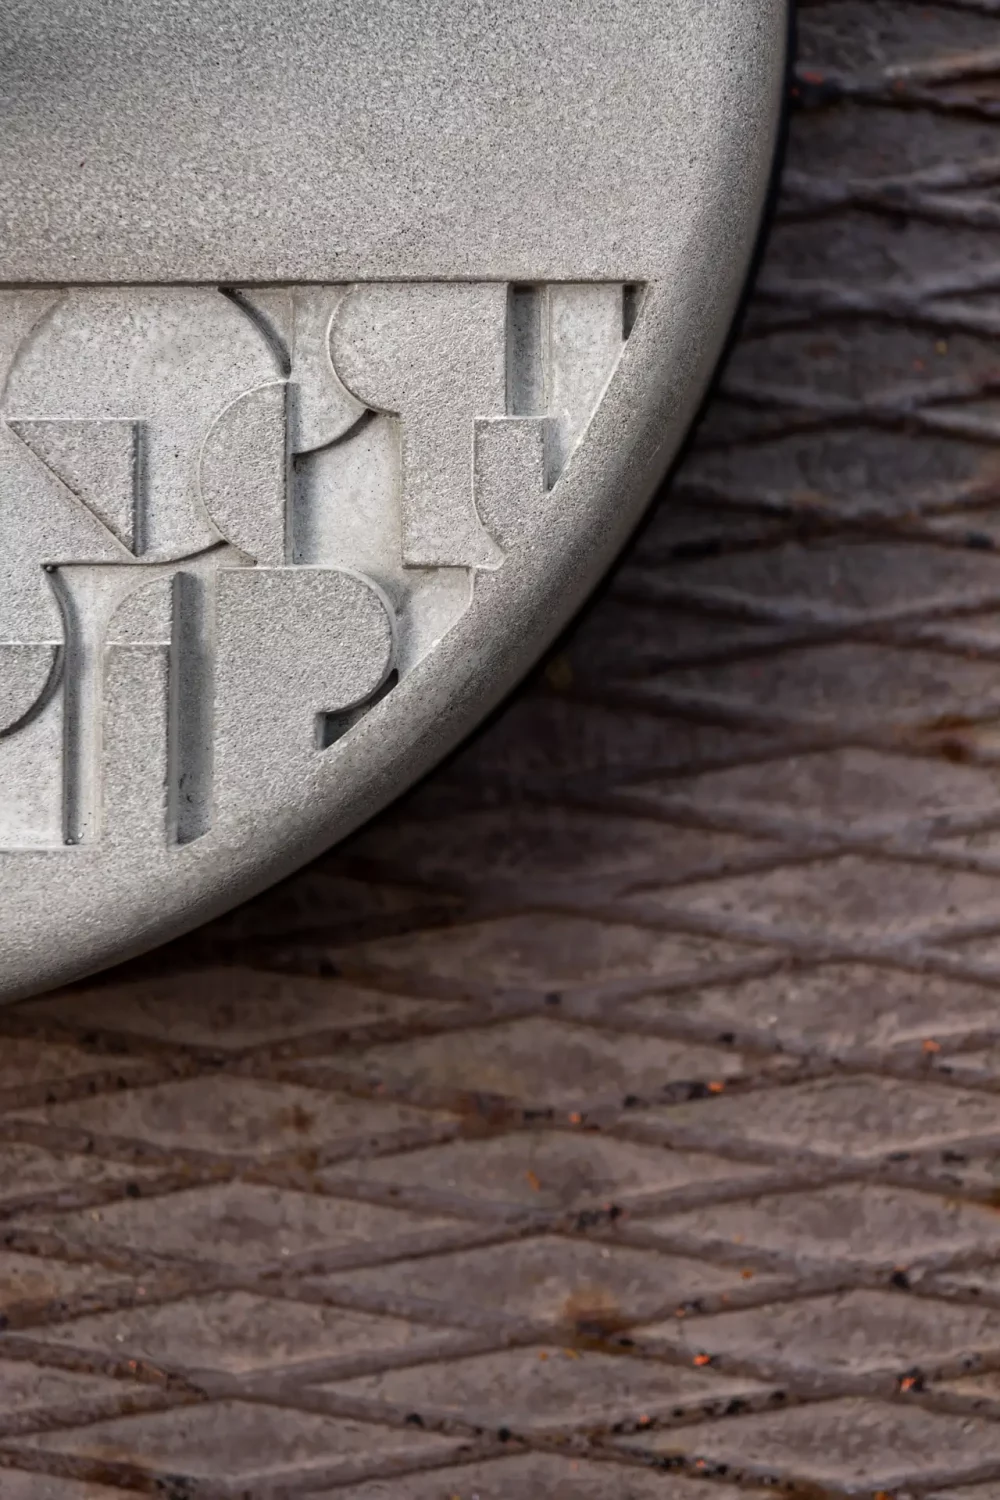 a glimpse of the Brutalist-inspired bas-relief pattern molded into the concrete ballast